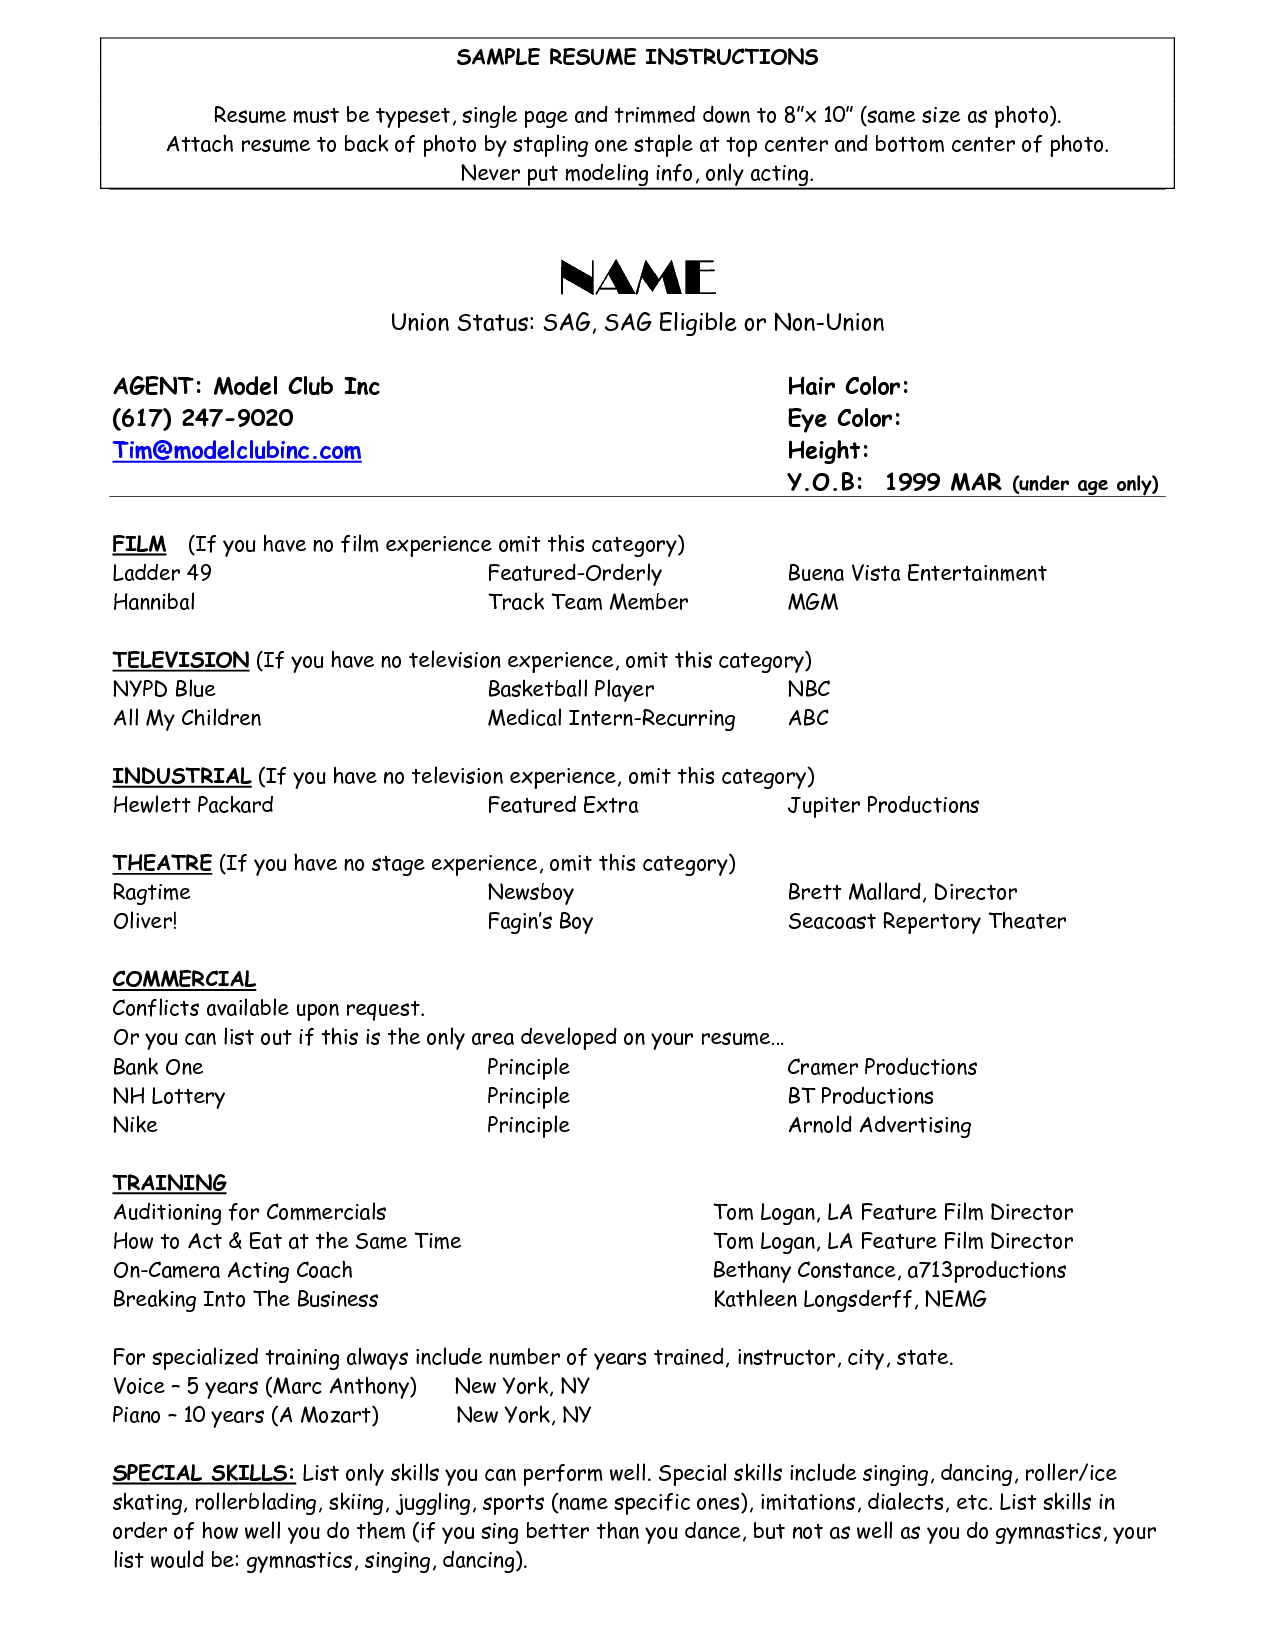 Resume For Child Actor Scope Of Work Template Acting Resume inside dimensions 1275 X 1650